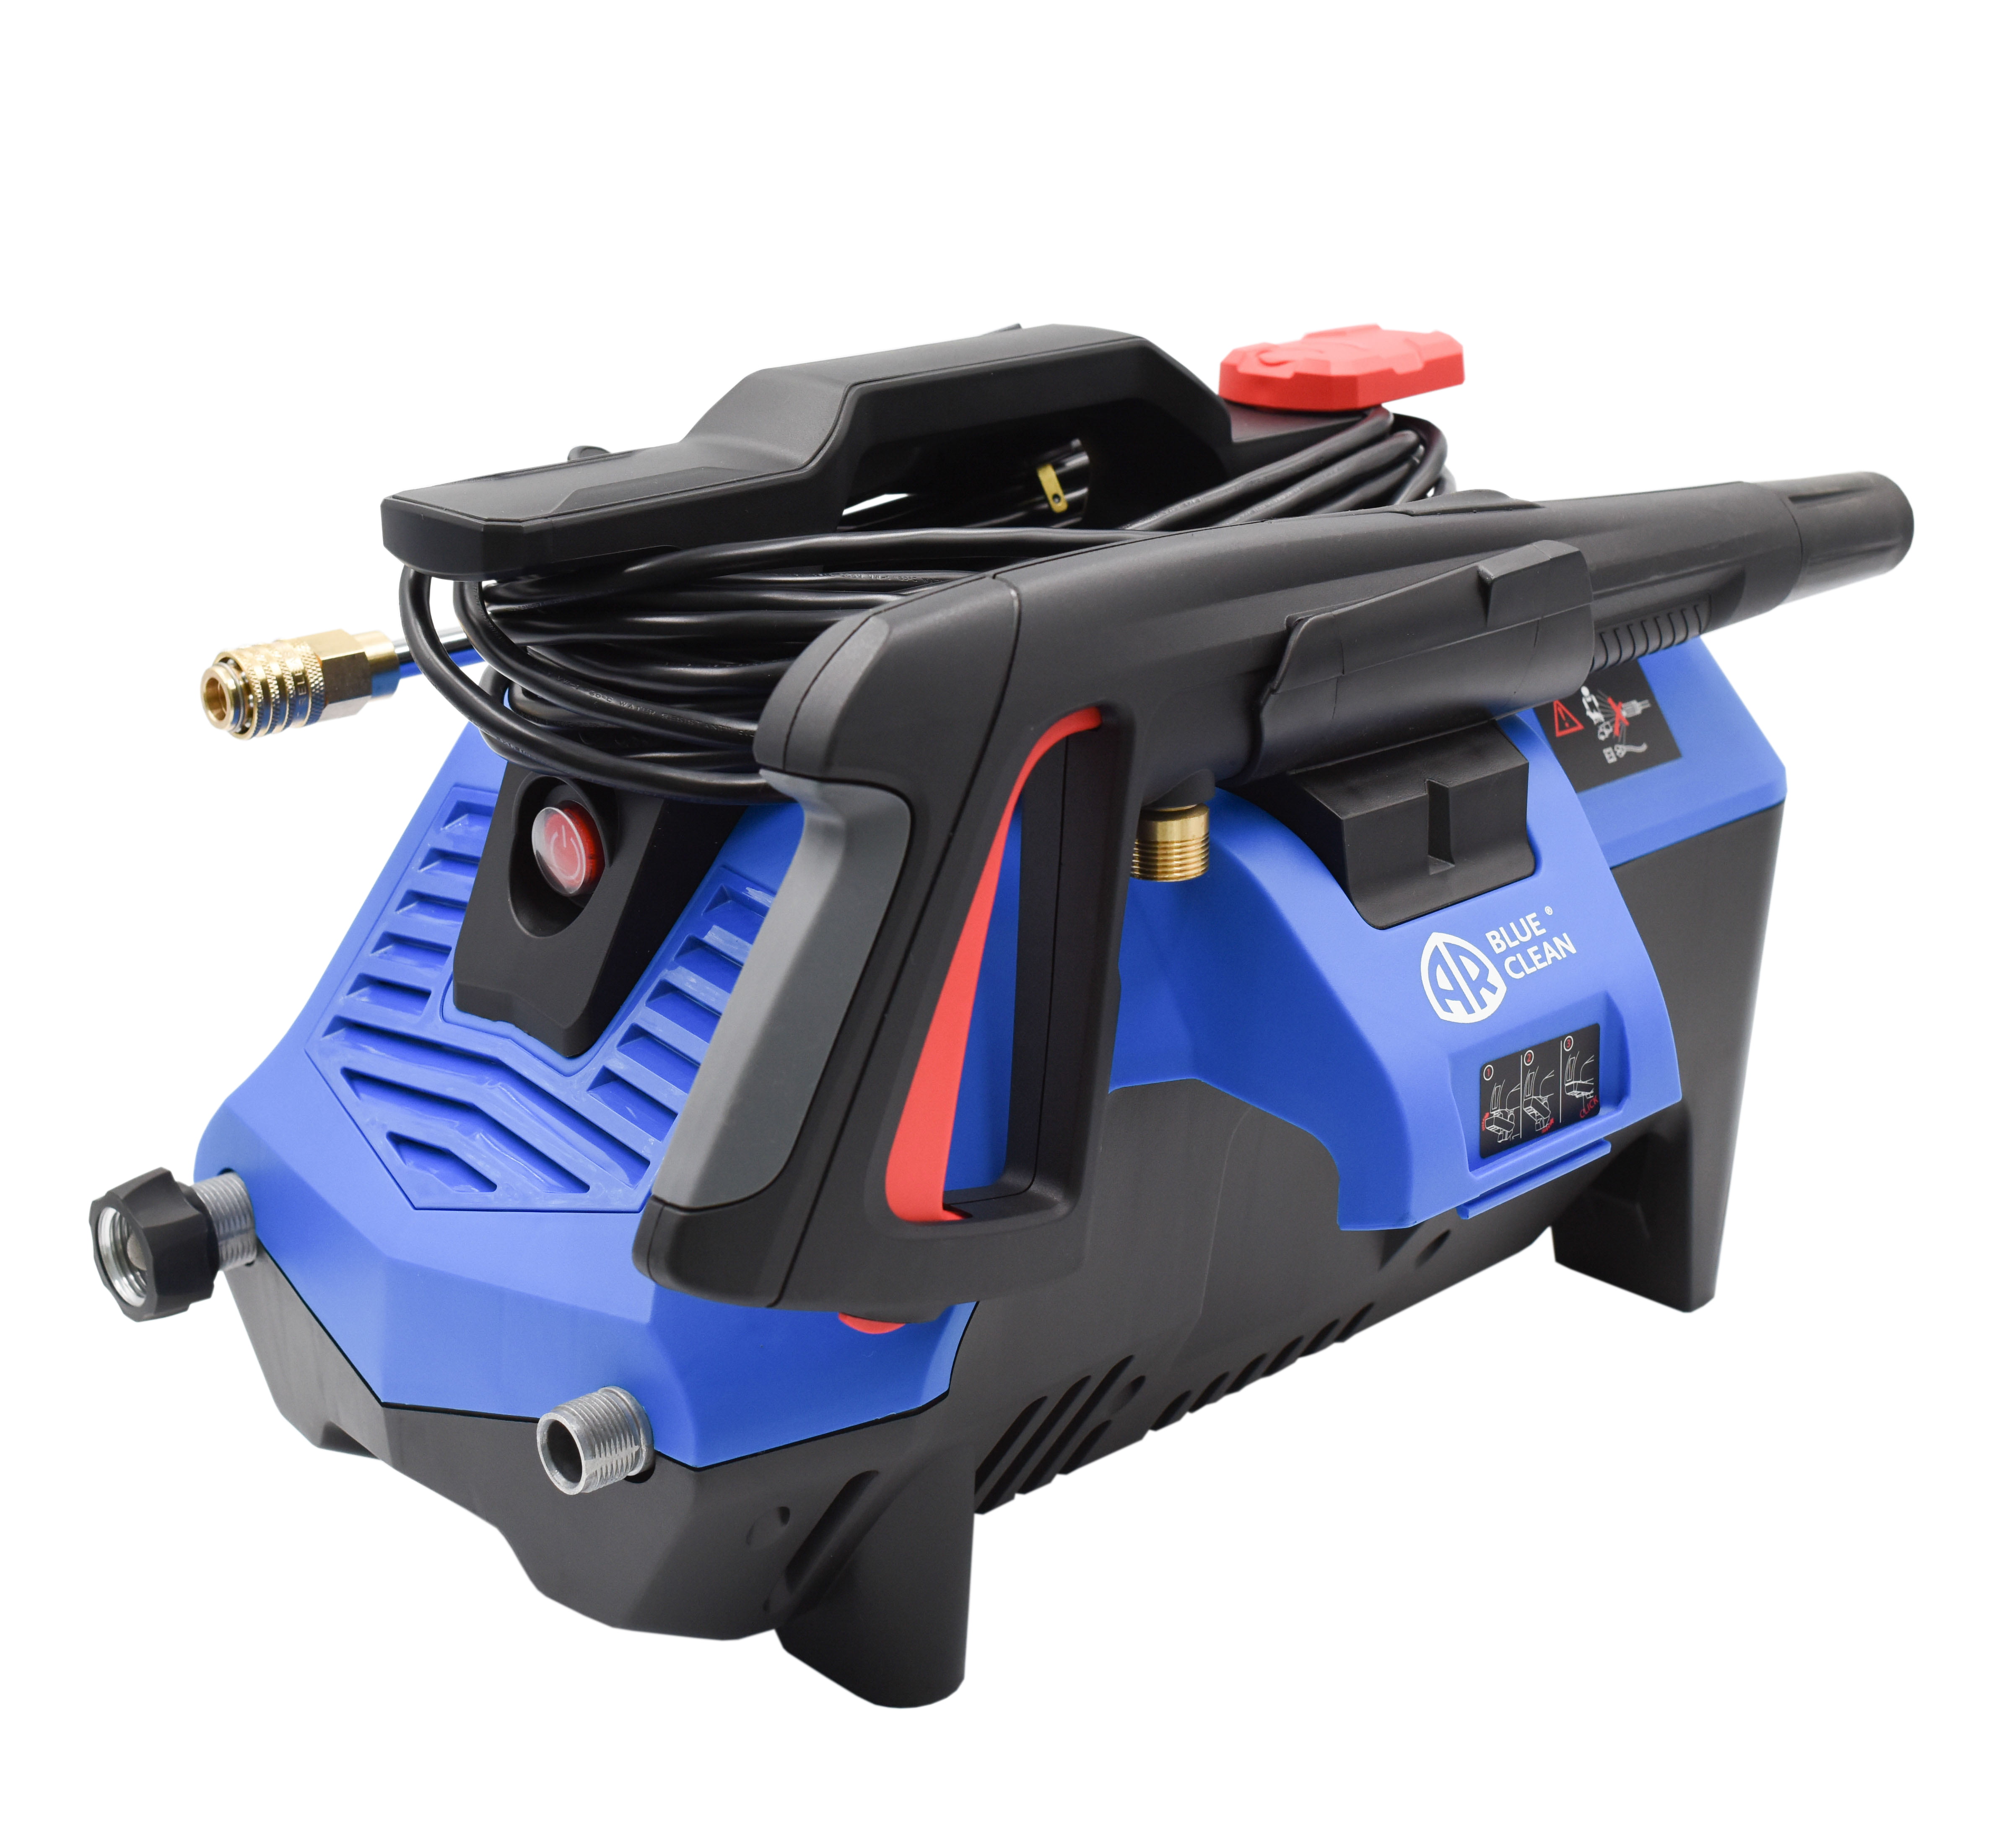 AR Blue Clean BC2N1HSS Electric Pressure Washer - 2300 PSI, 1.7 GPM, 13 Amps - 1